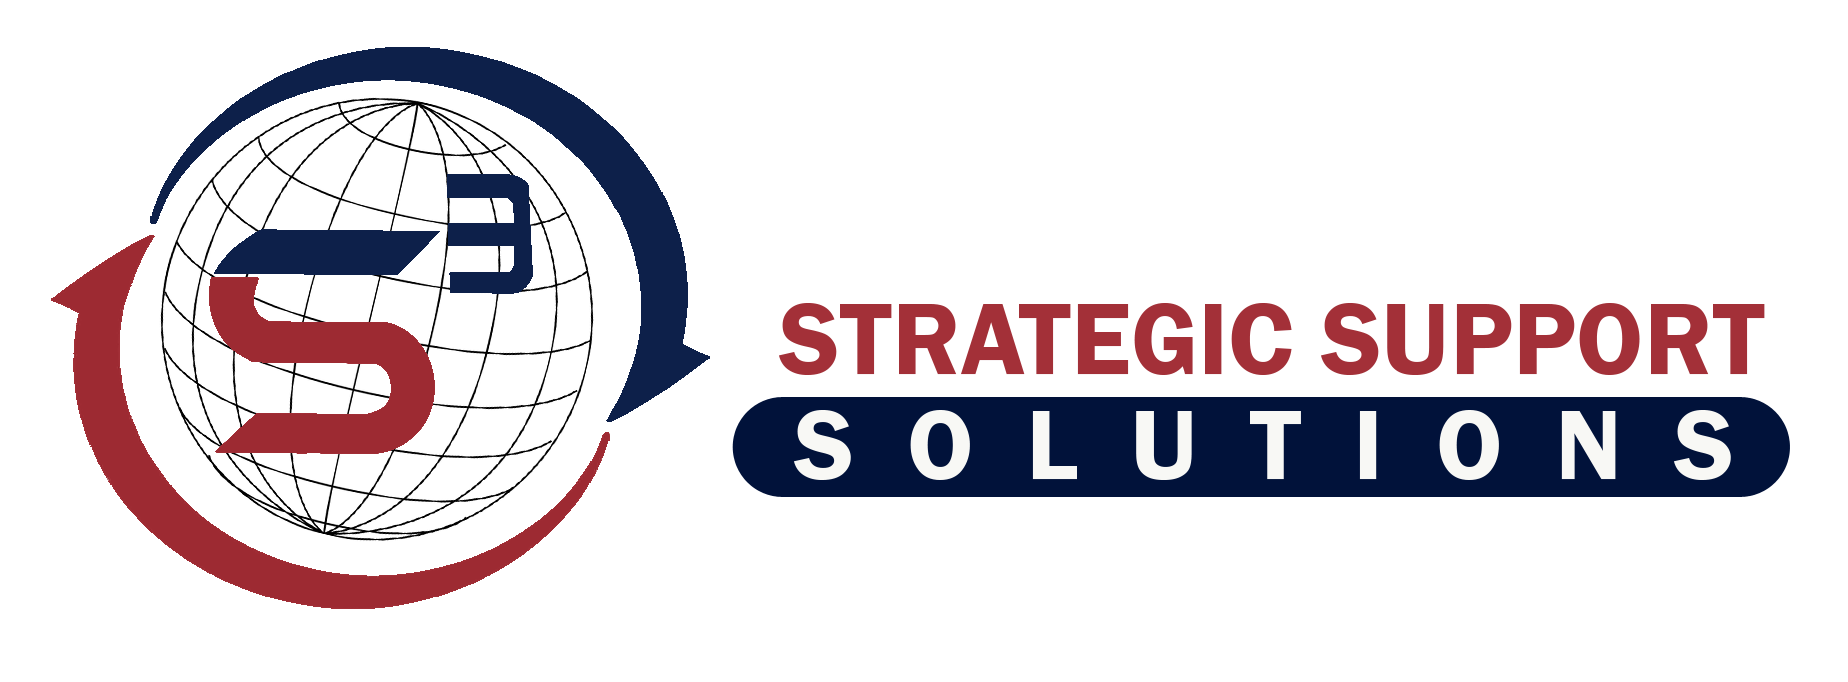 Strategic Support Solutions